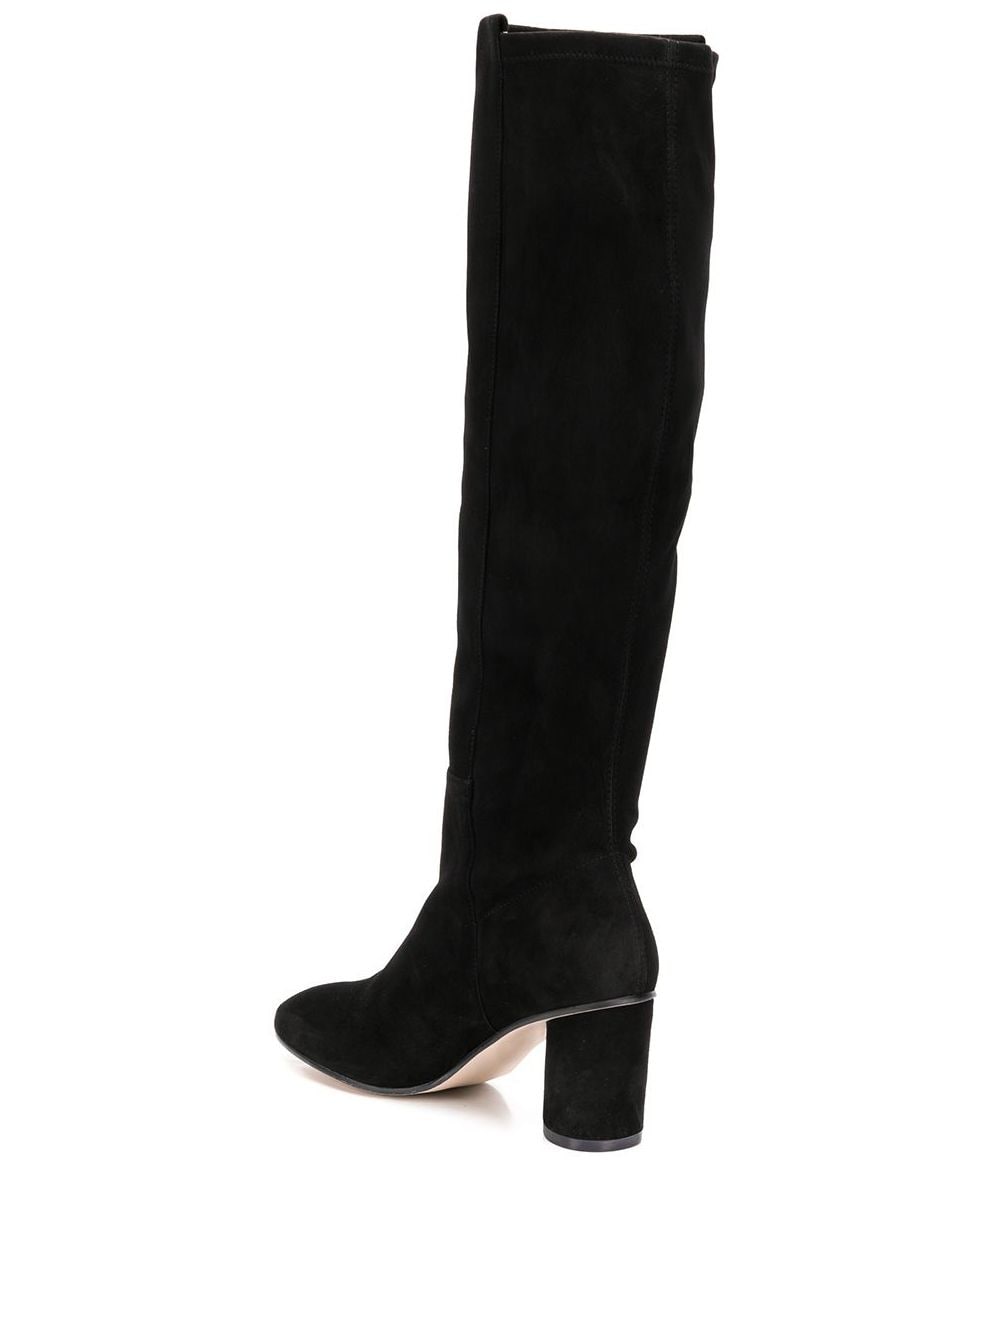 the eloise 75 boot